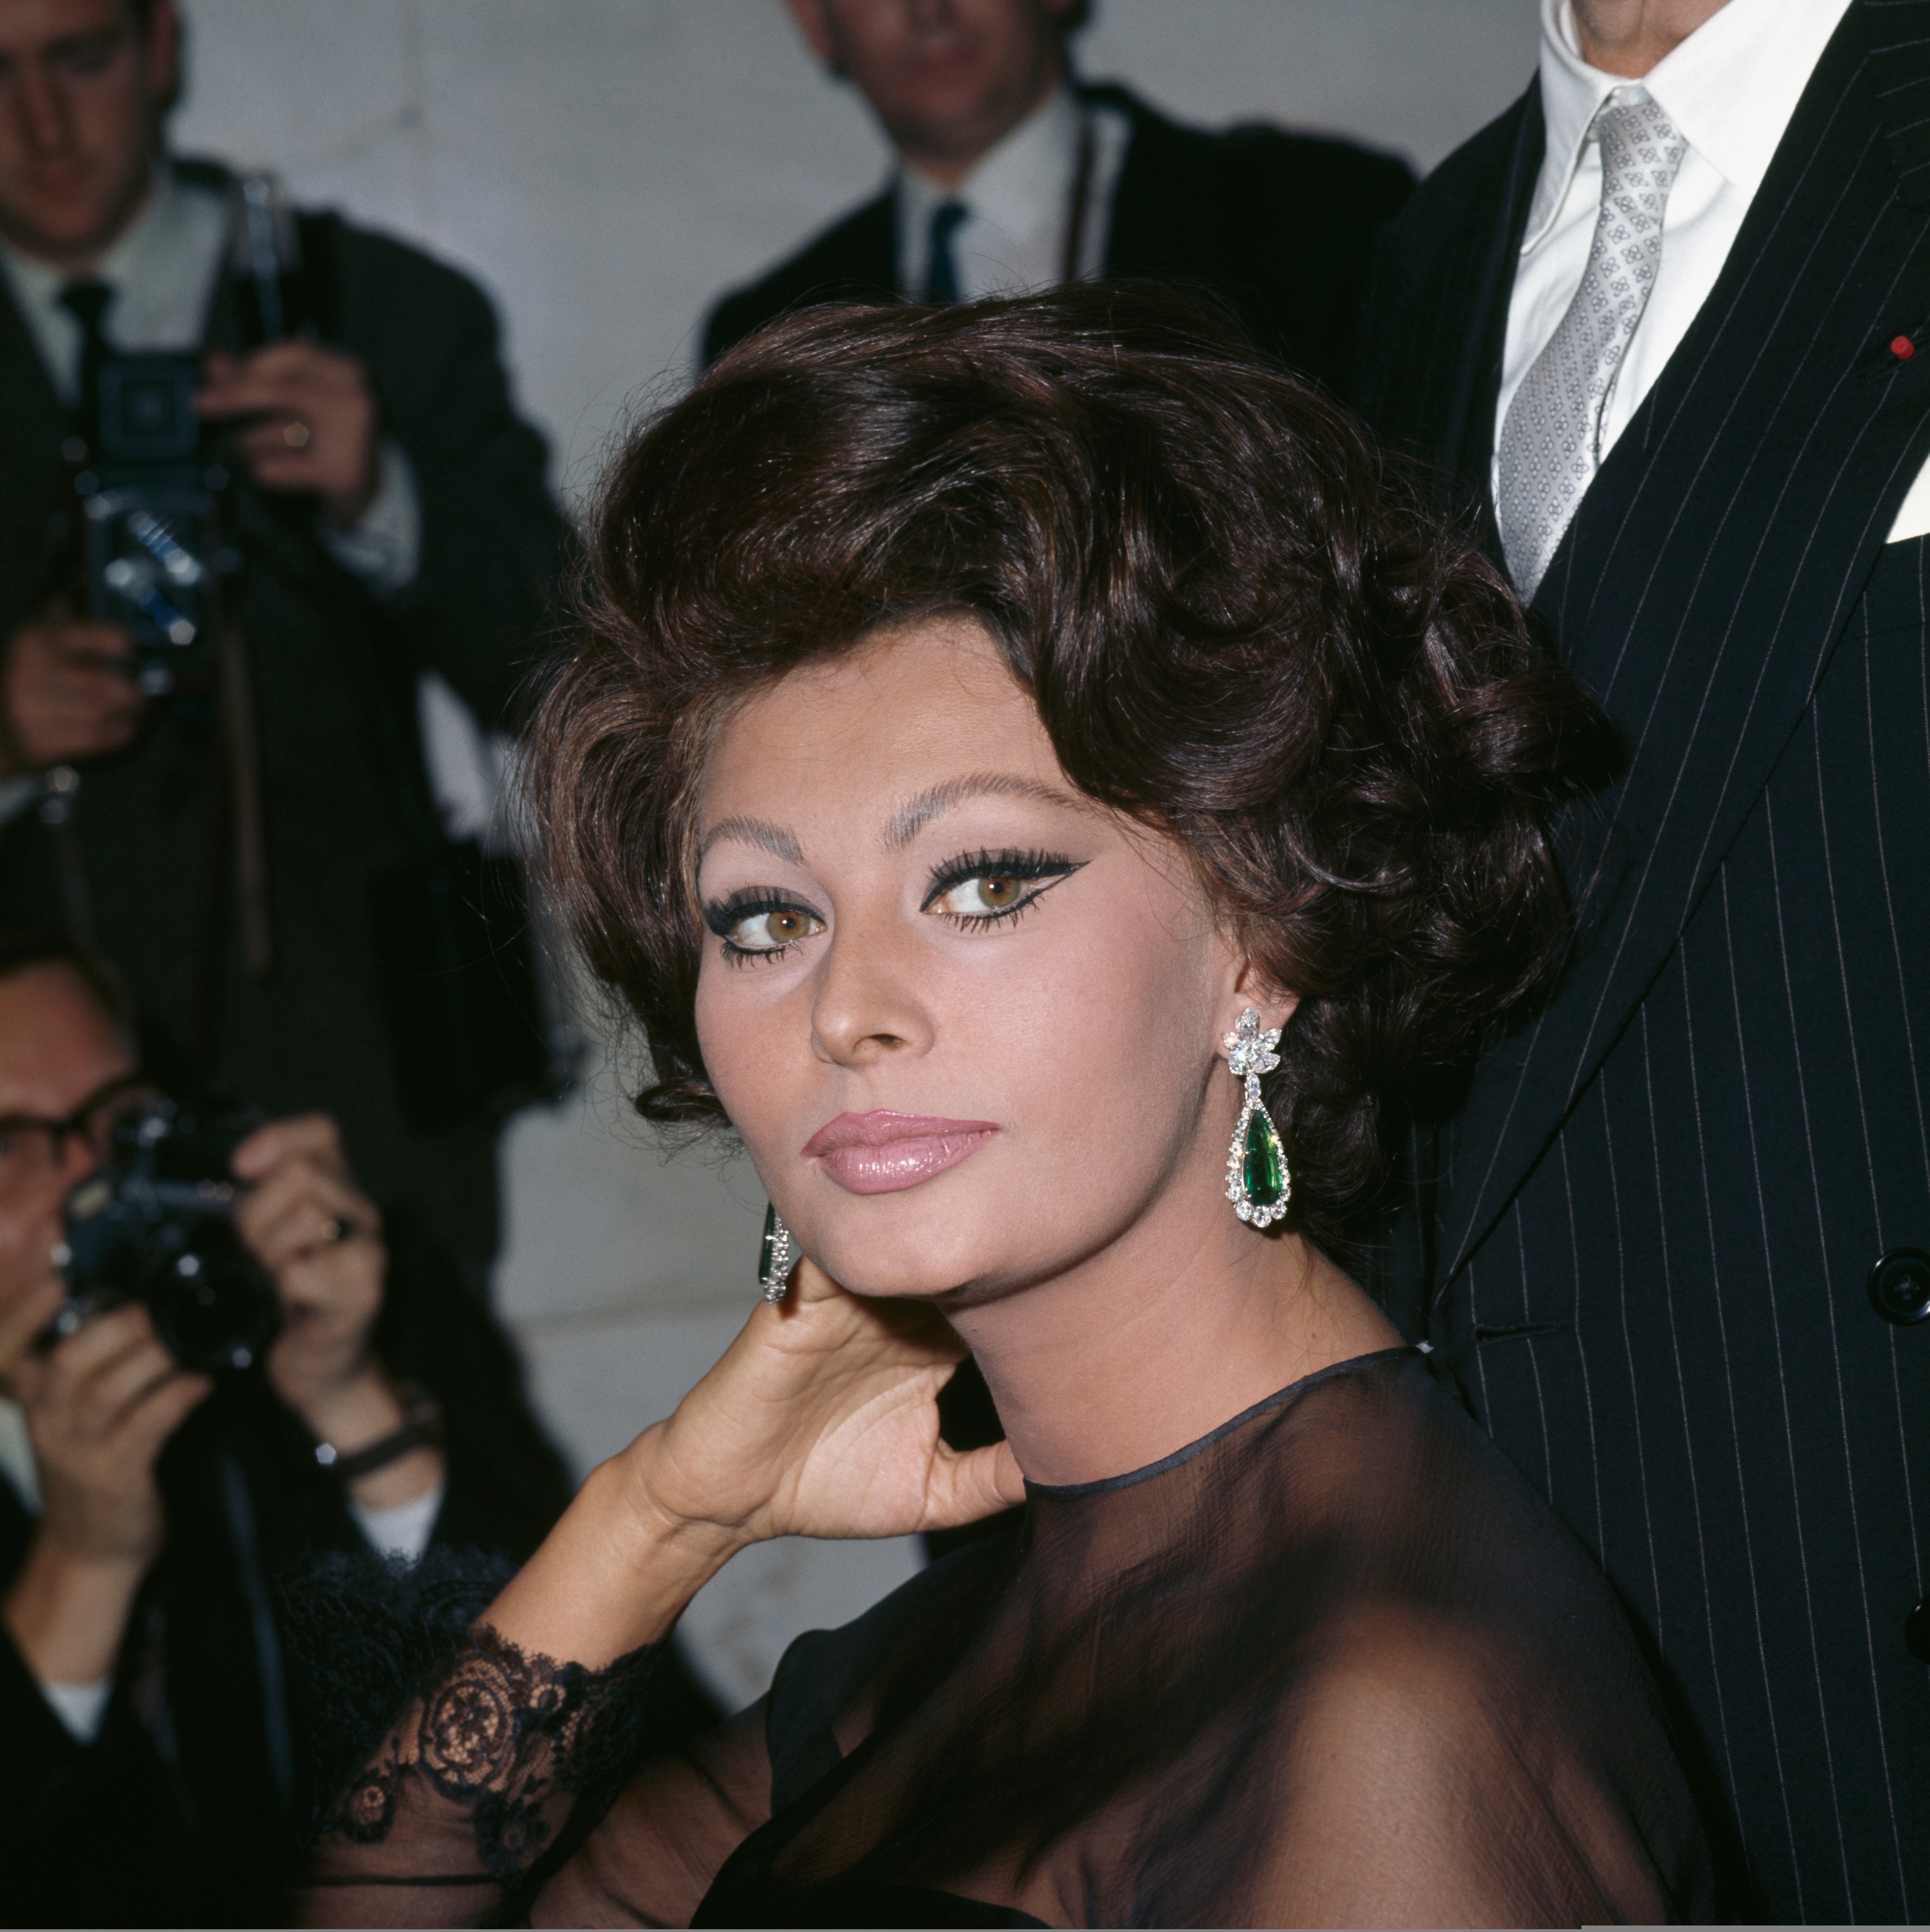 Sophia Loren poses for photographers. | Source: Getty Images